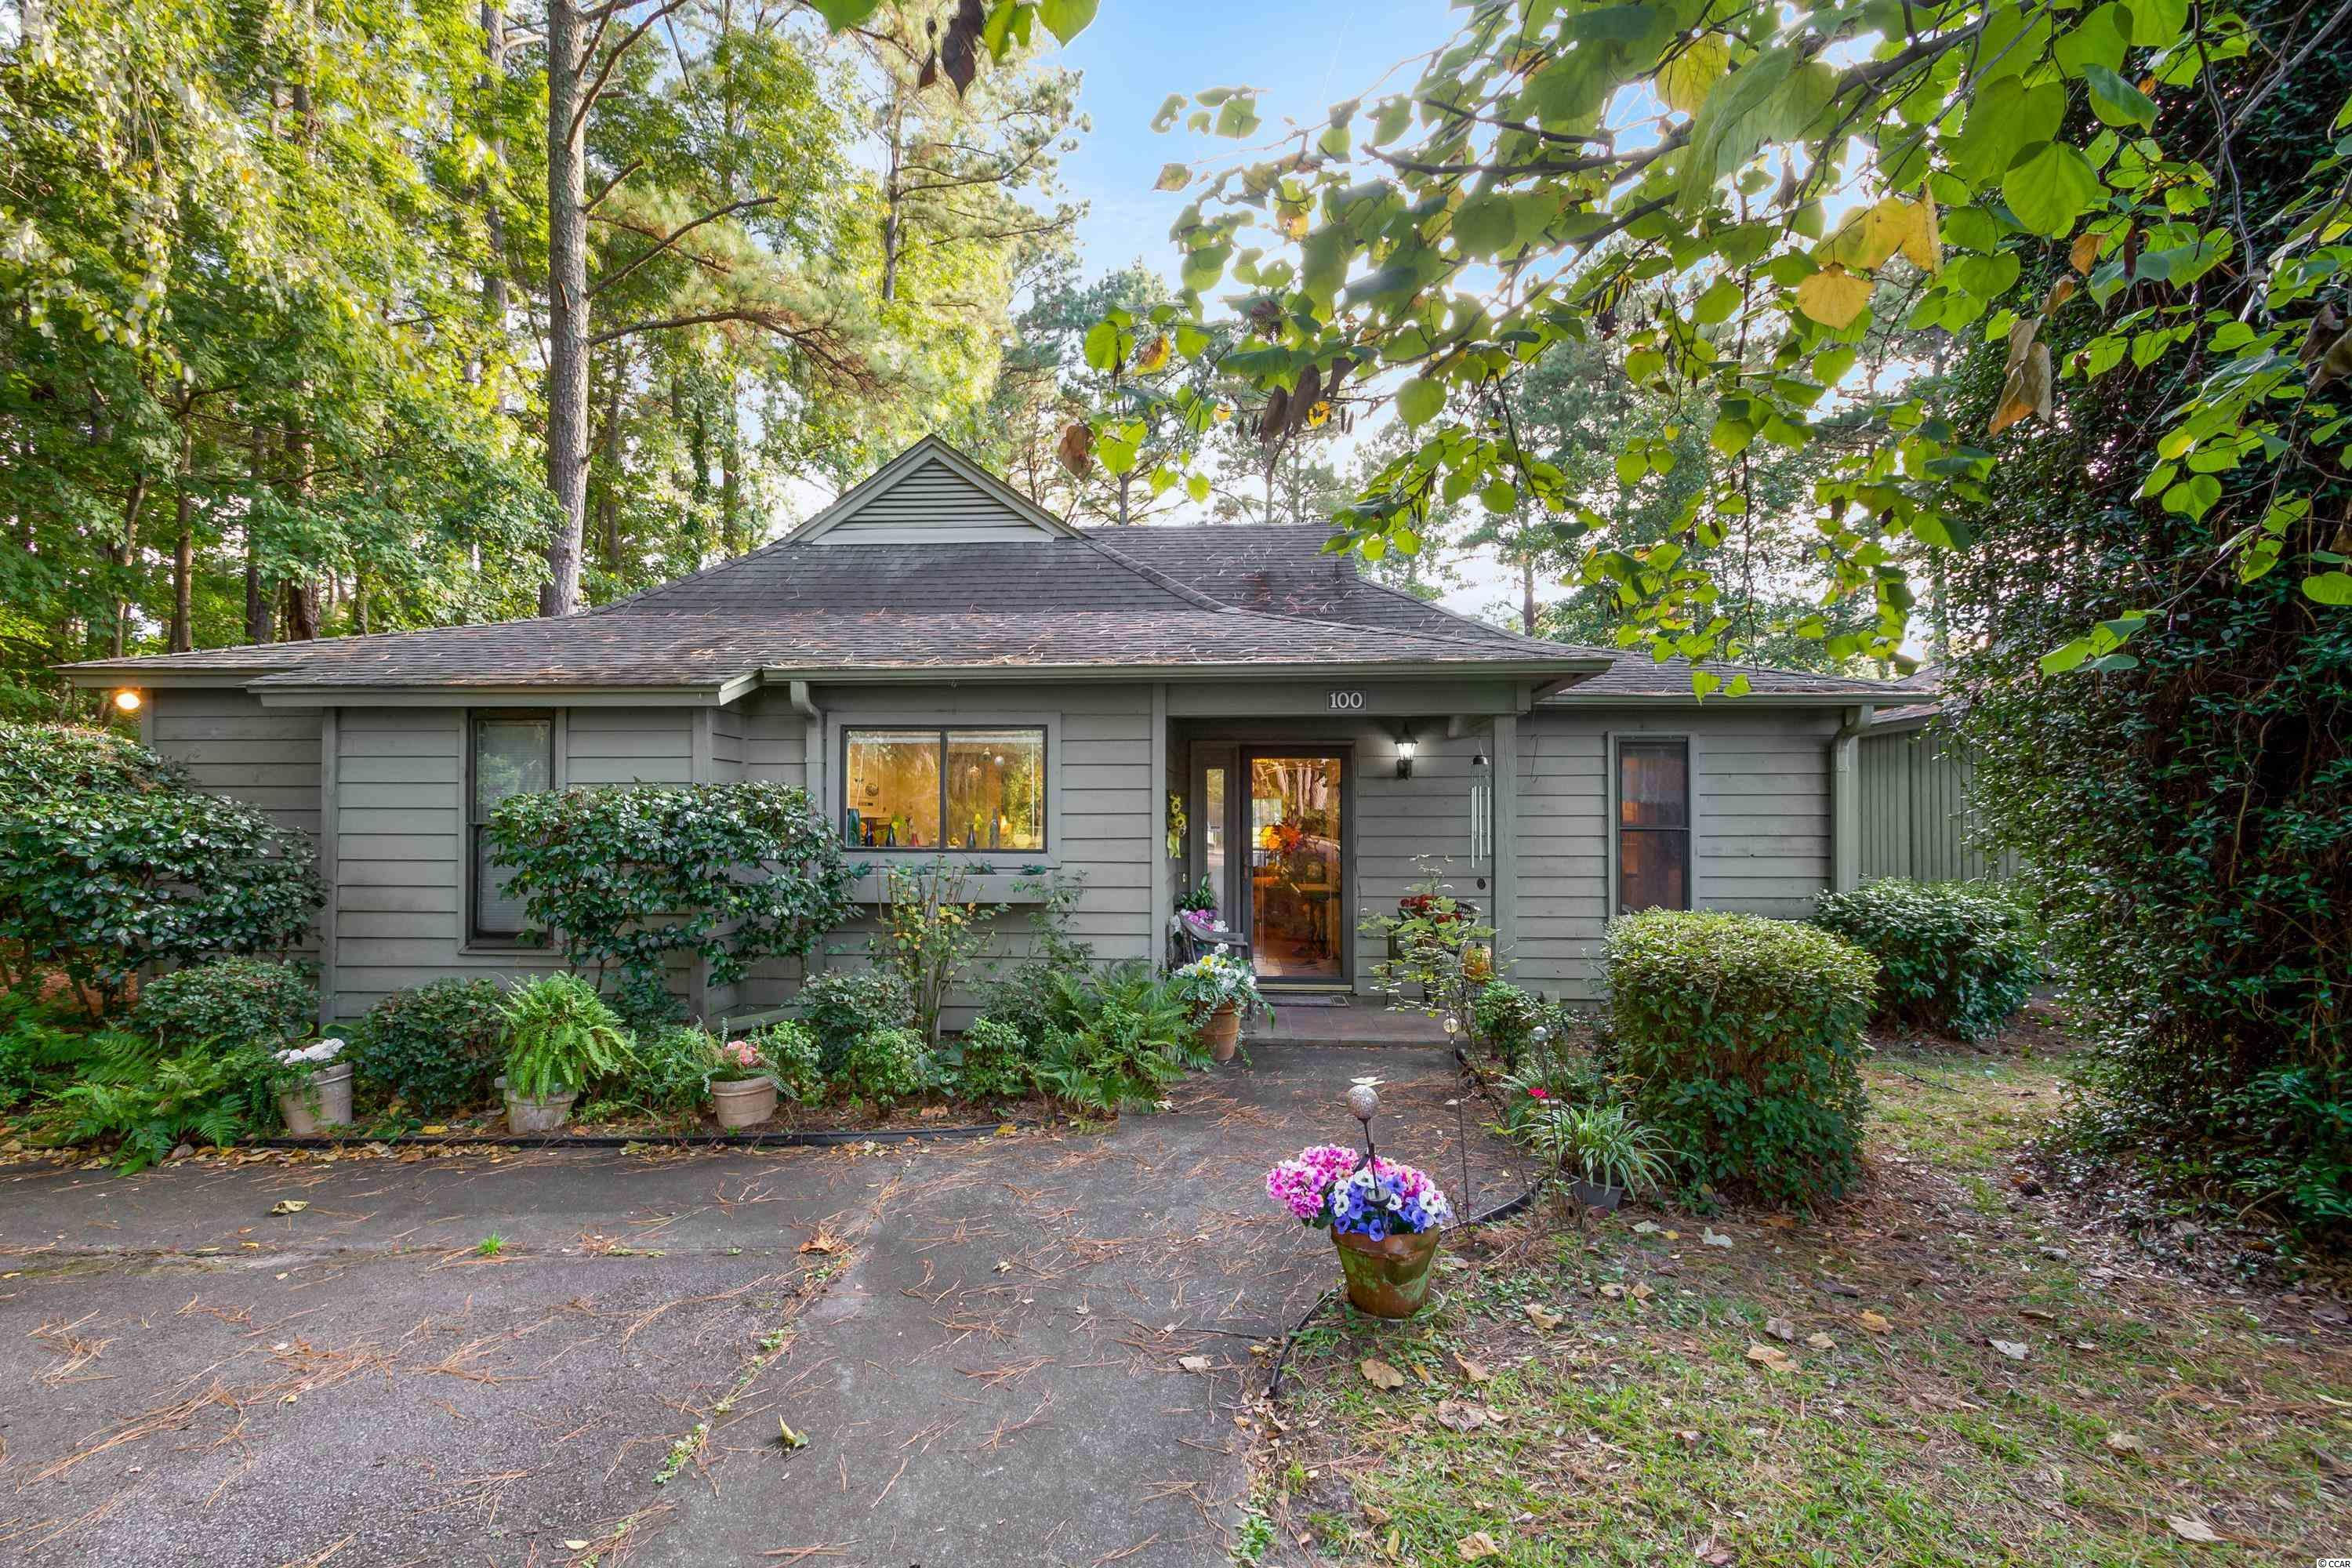 100 Berry Tree Ln., Conway, SC 29526